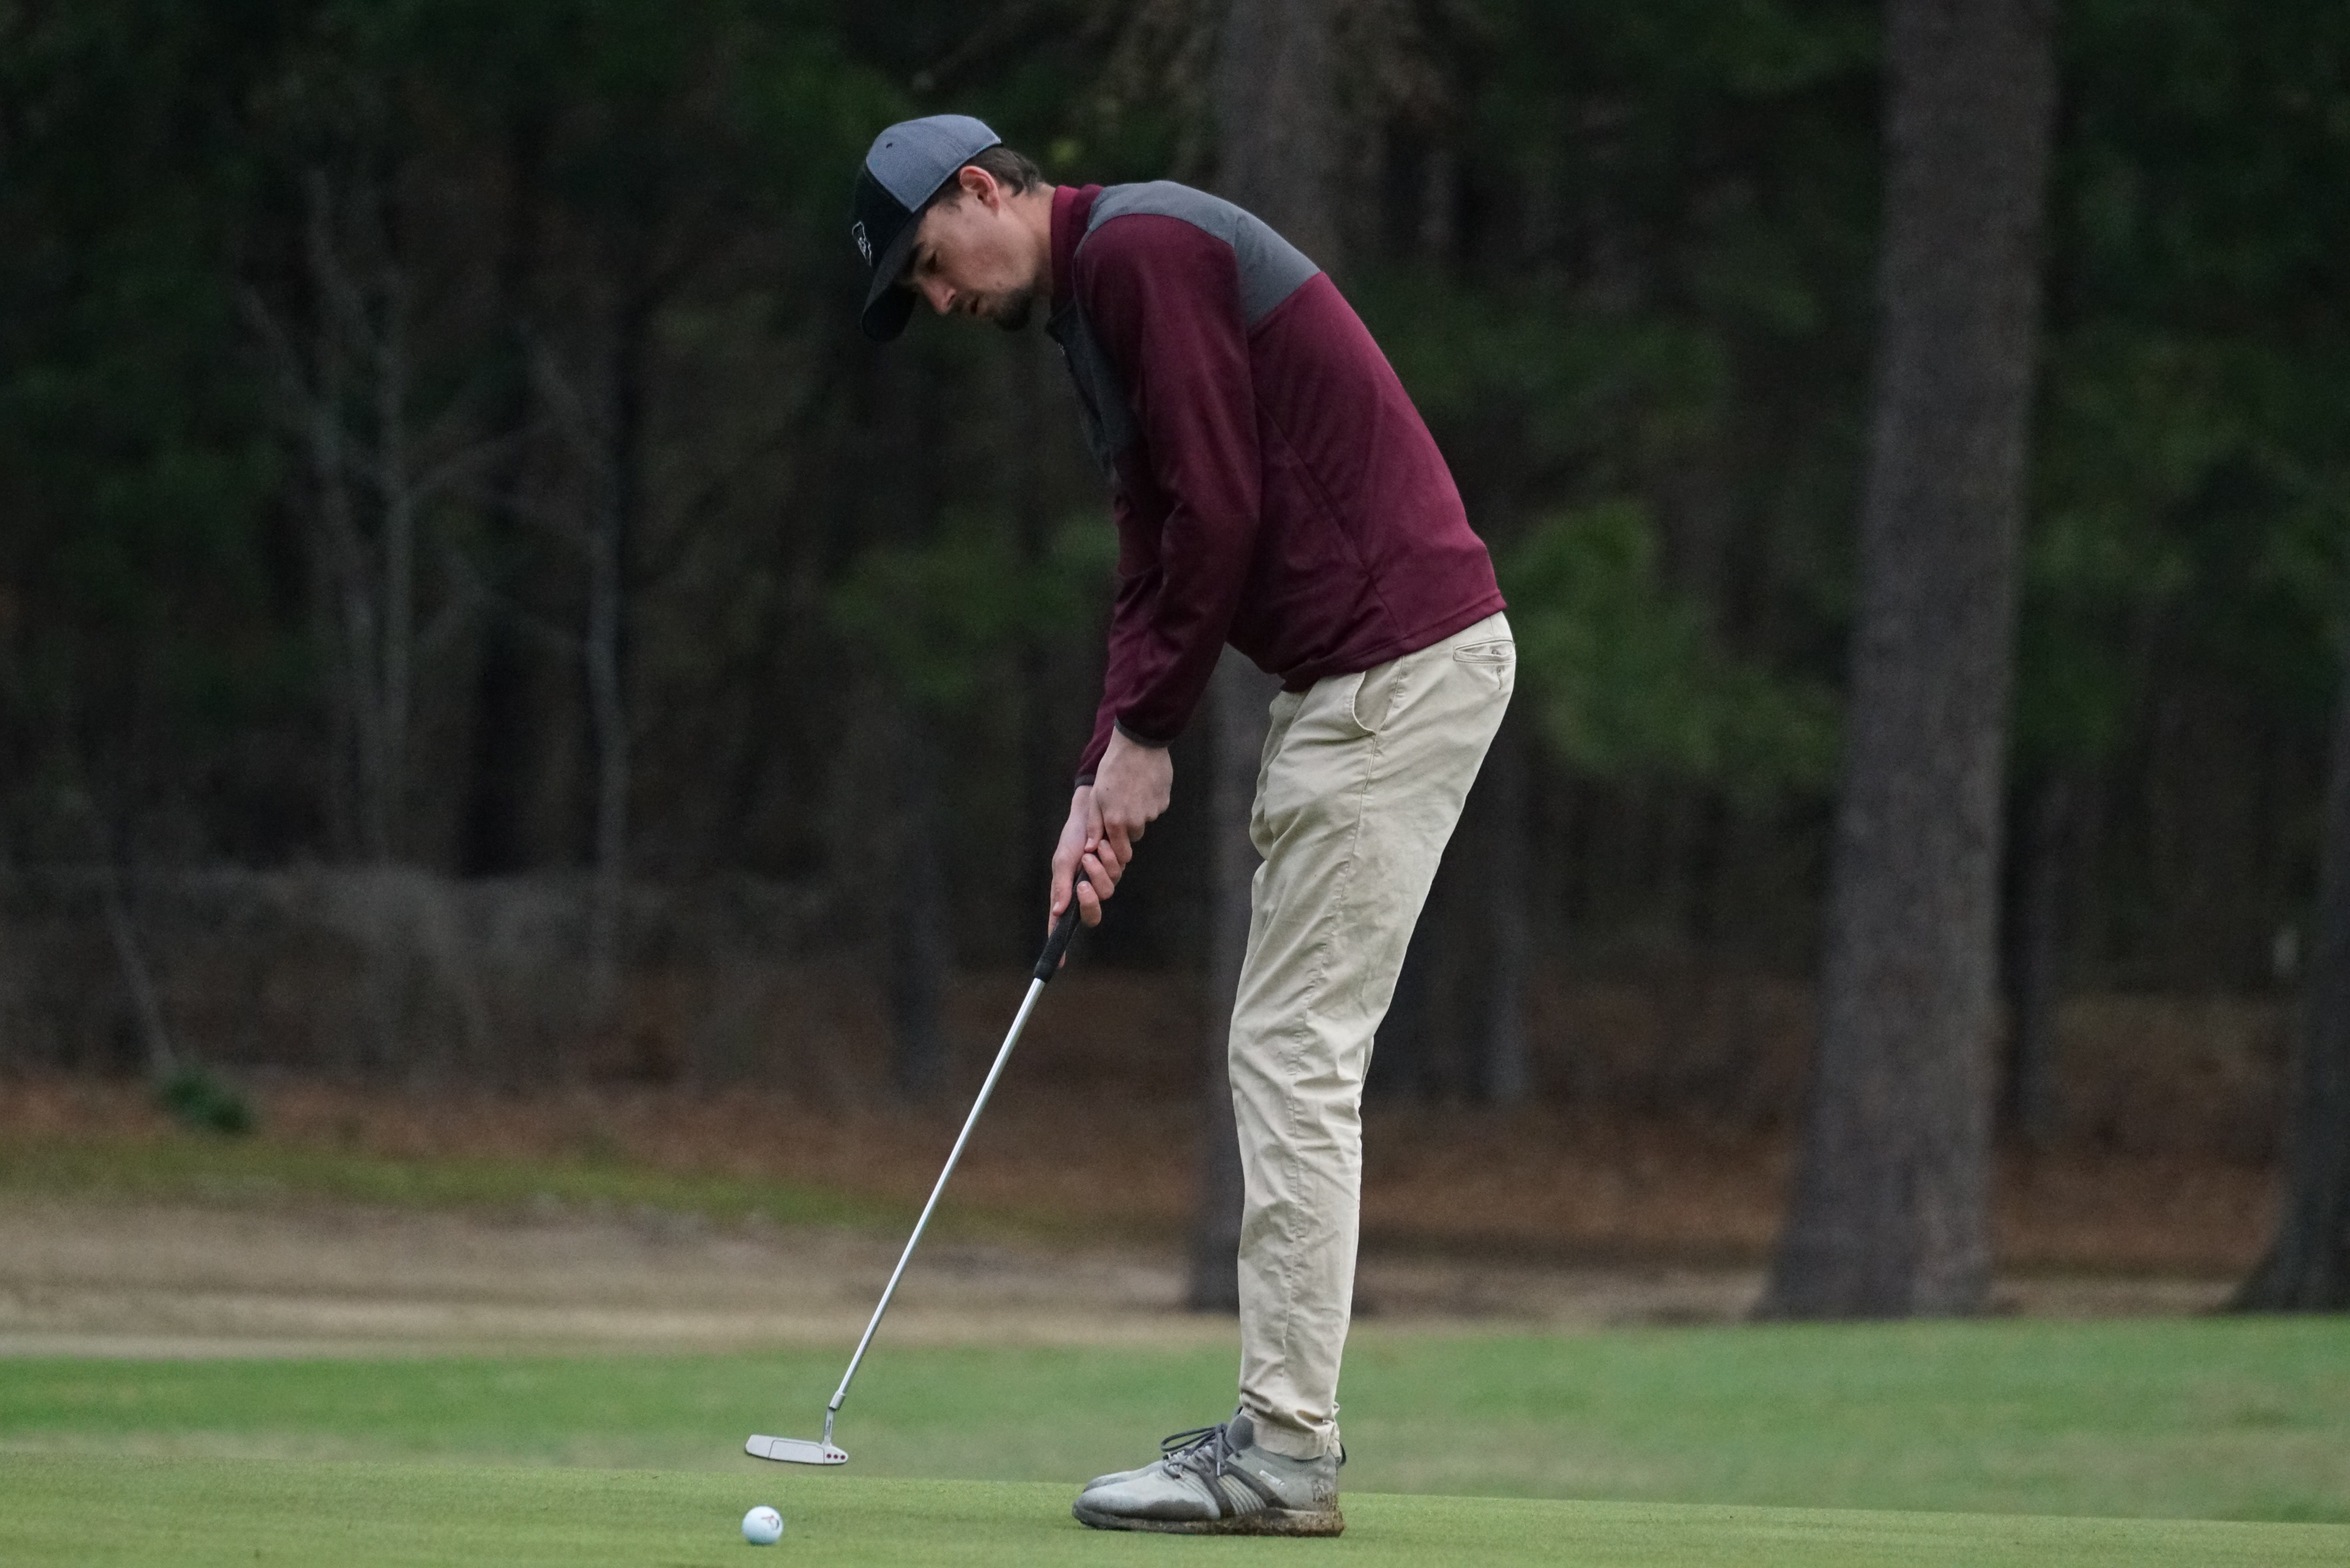 Freshman Aubrey Snell shot the Gents' lowest round on Sunday and is tied for 17th place.